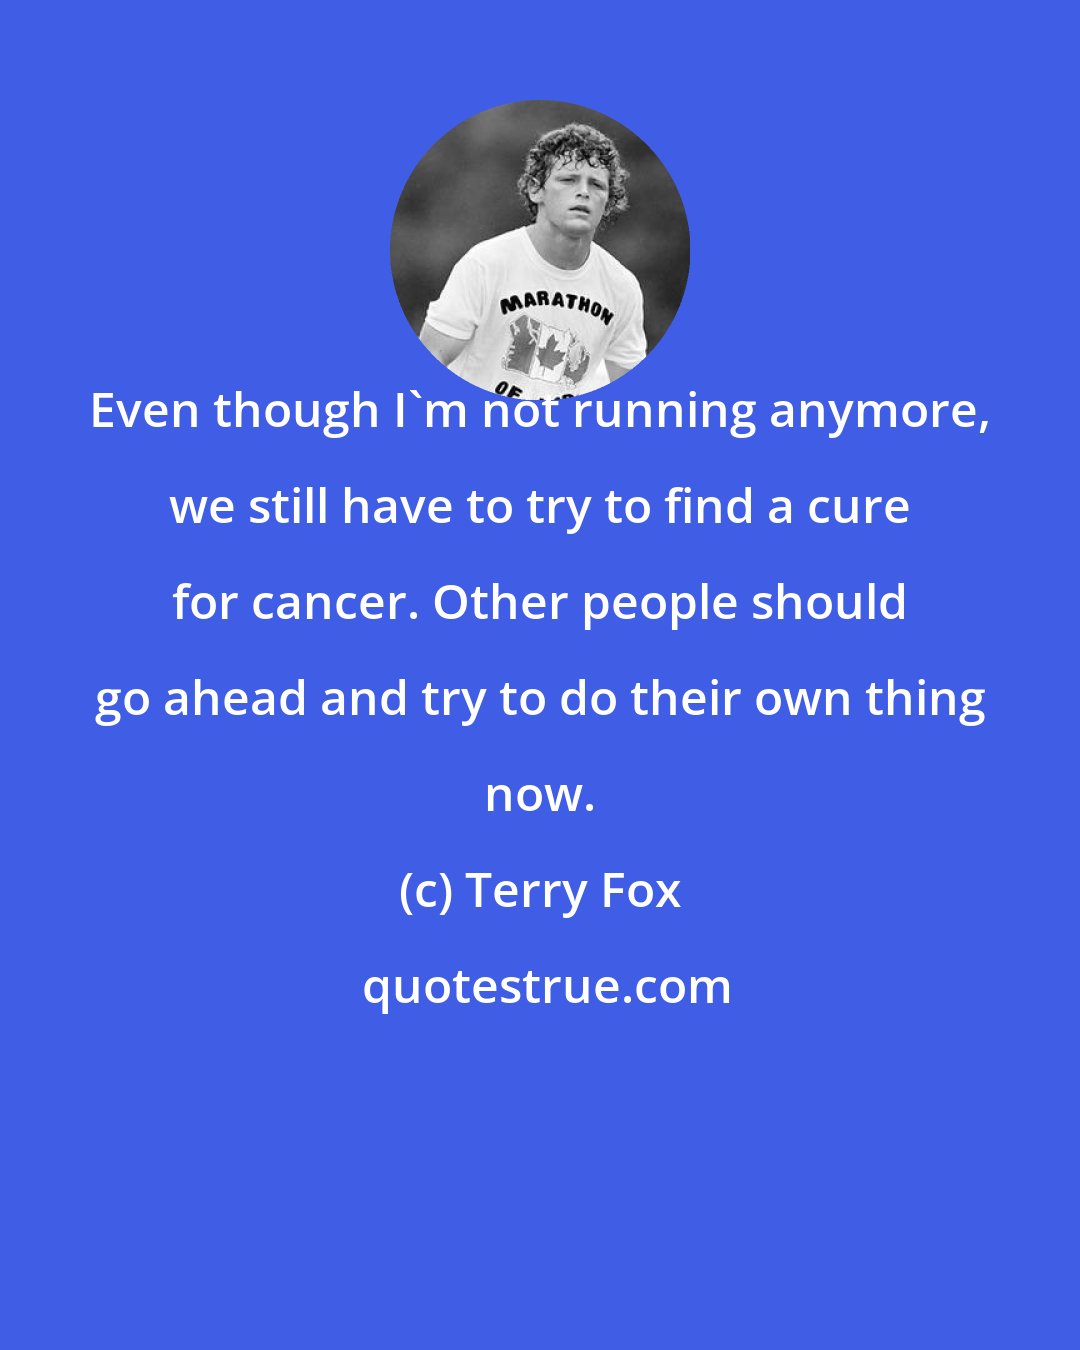 Terry Fox: Even though I'm not running anymore, we still have to try to find a cure for cancer. Other people should go ahead and try to do their own thing now.